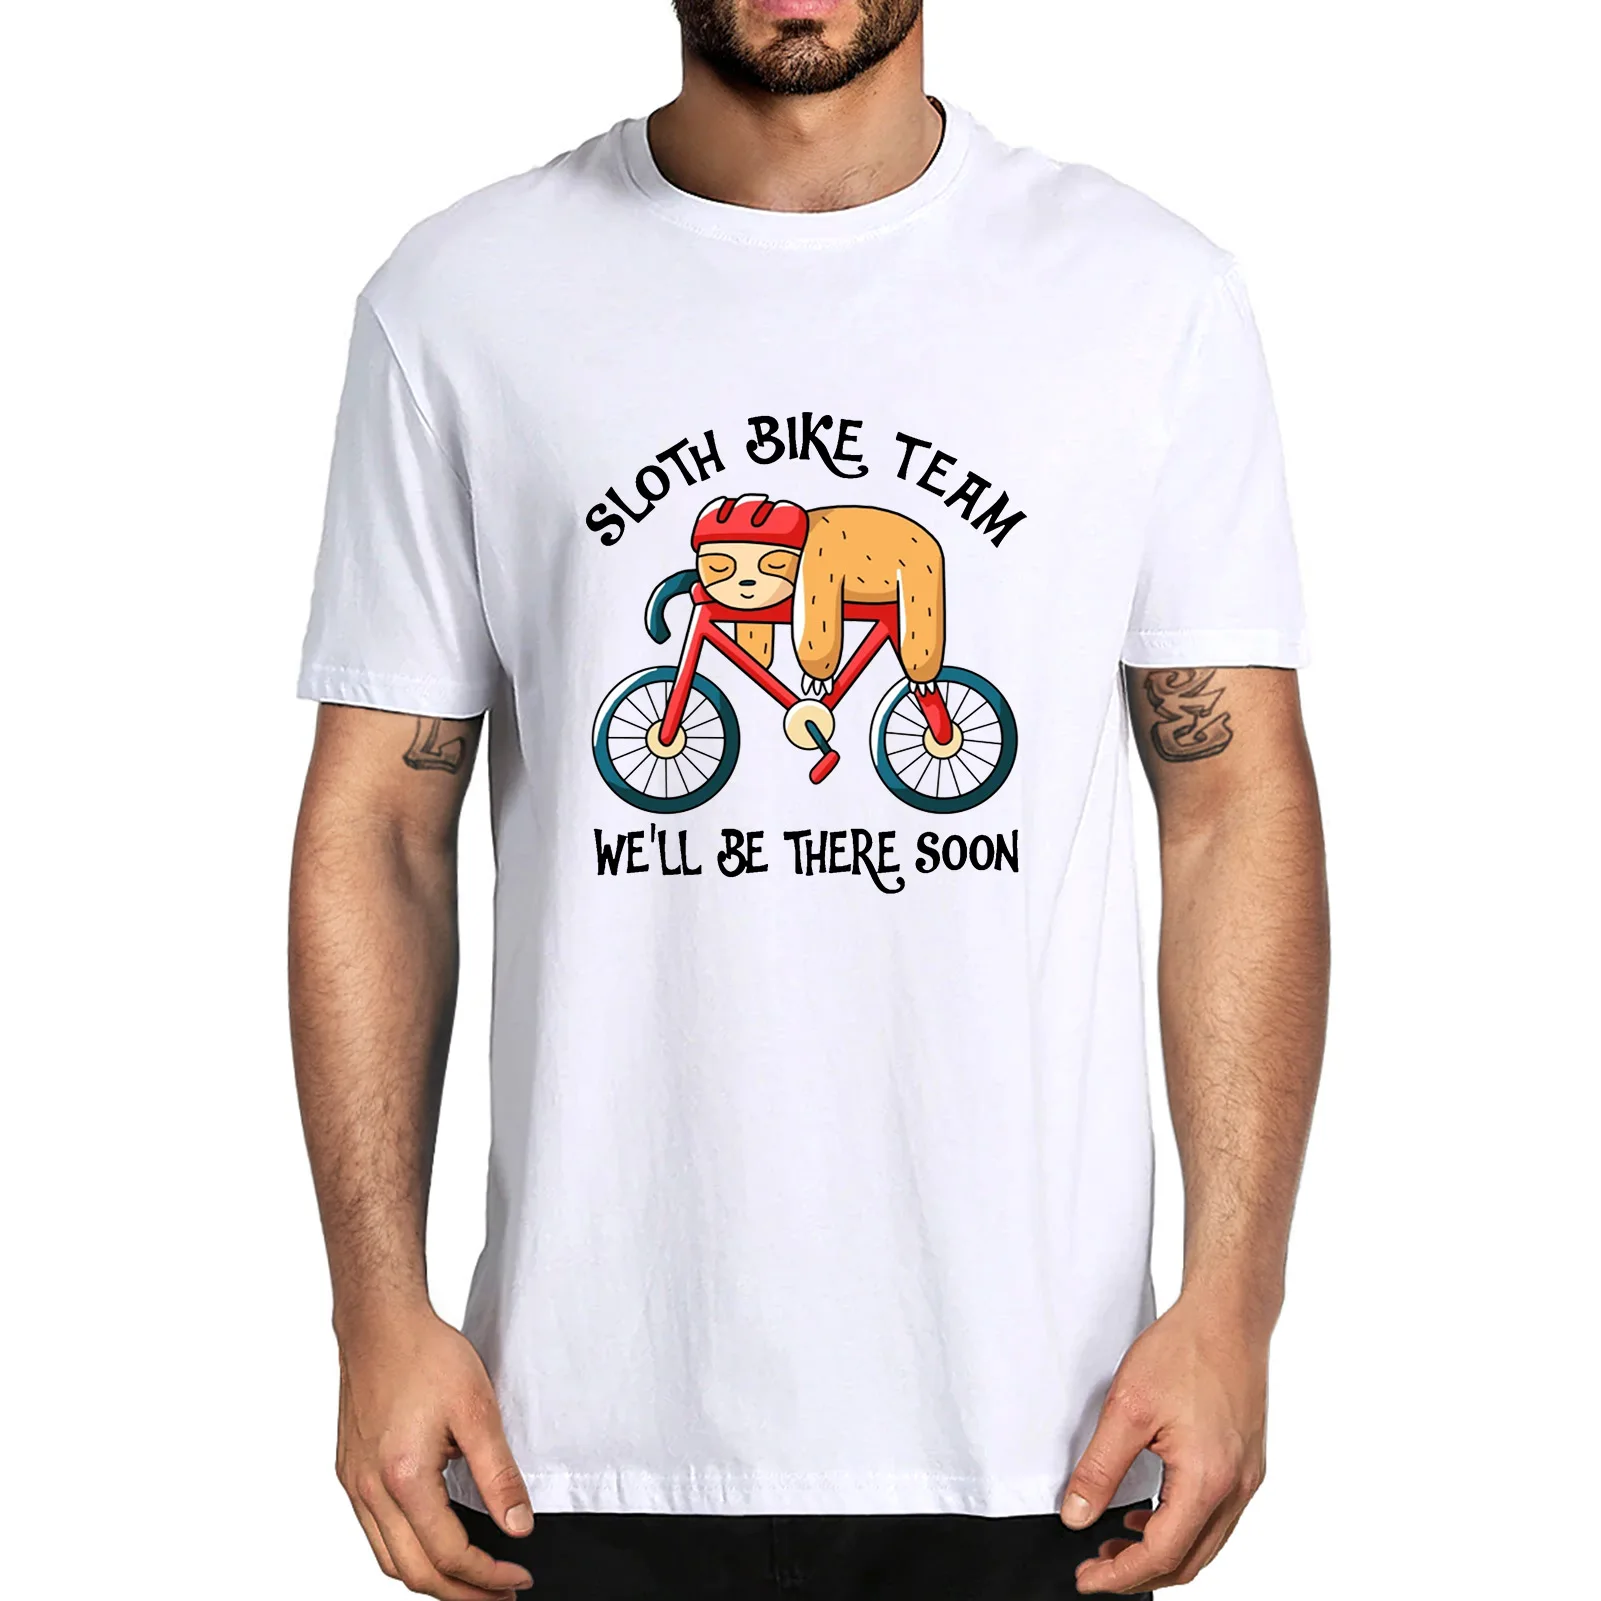 

Bicycle Sloth Bike Team We'll Be There Soon Cycling Riding Funny Summer Men's 100% Cotton T-Shirt Unisex Humor Streetwear Women